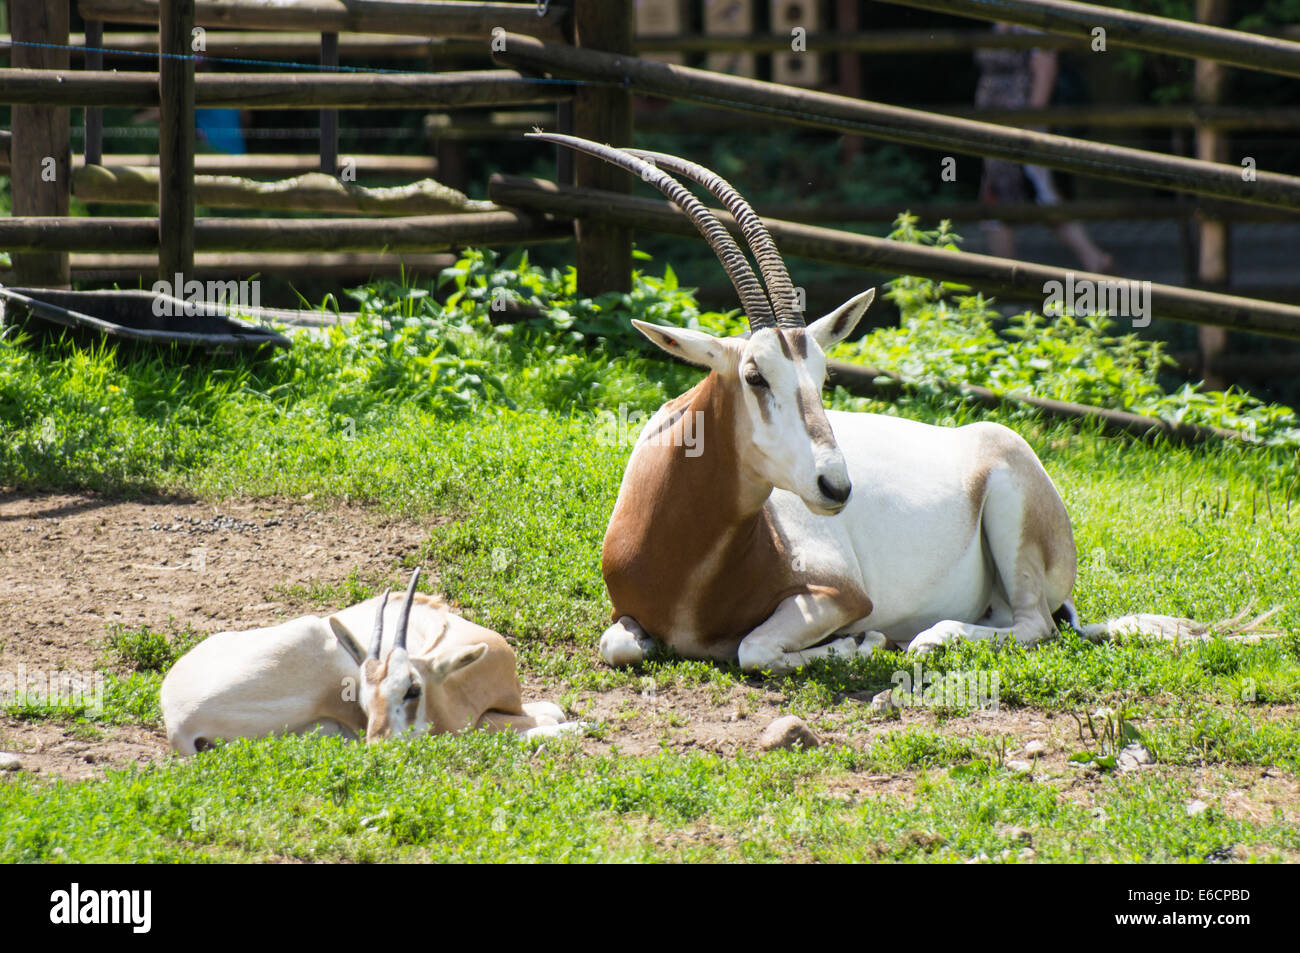 Scimitar Horned Oryx (oryx dammah) with young calf at the Zoo, Plock Poland Stock Photo